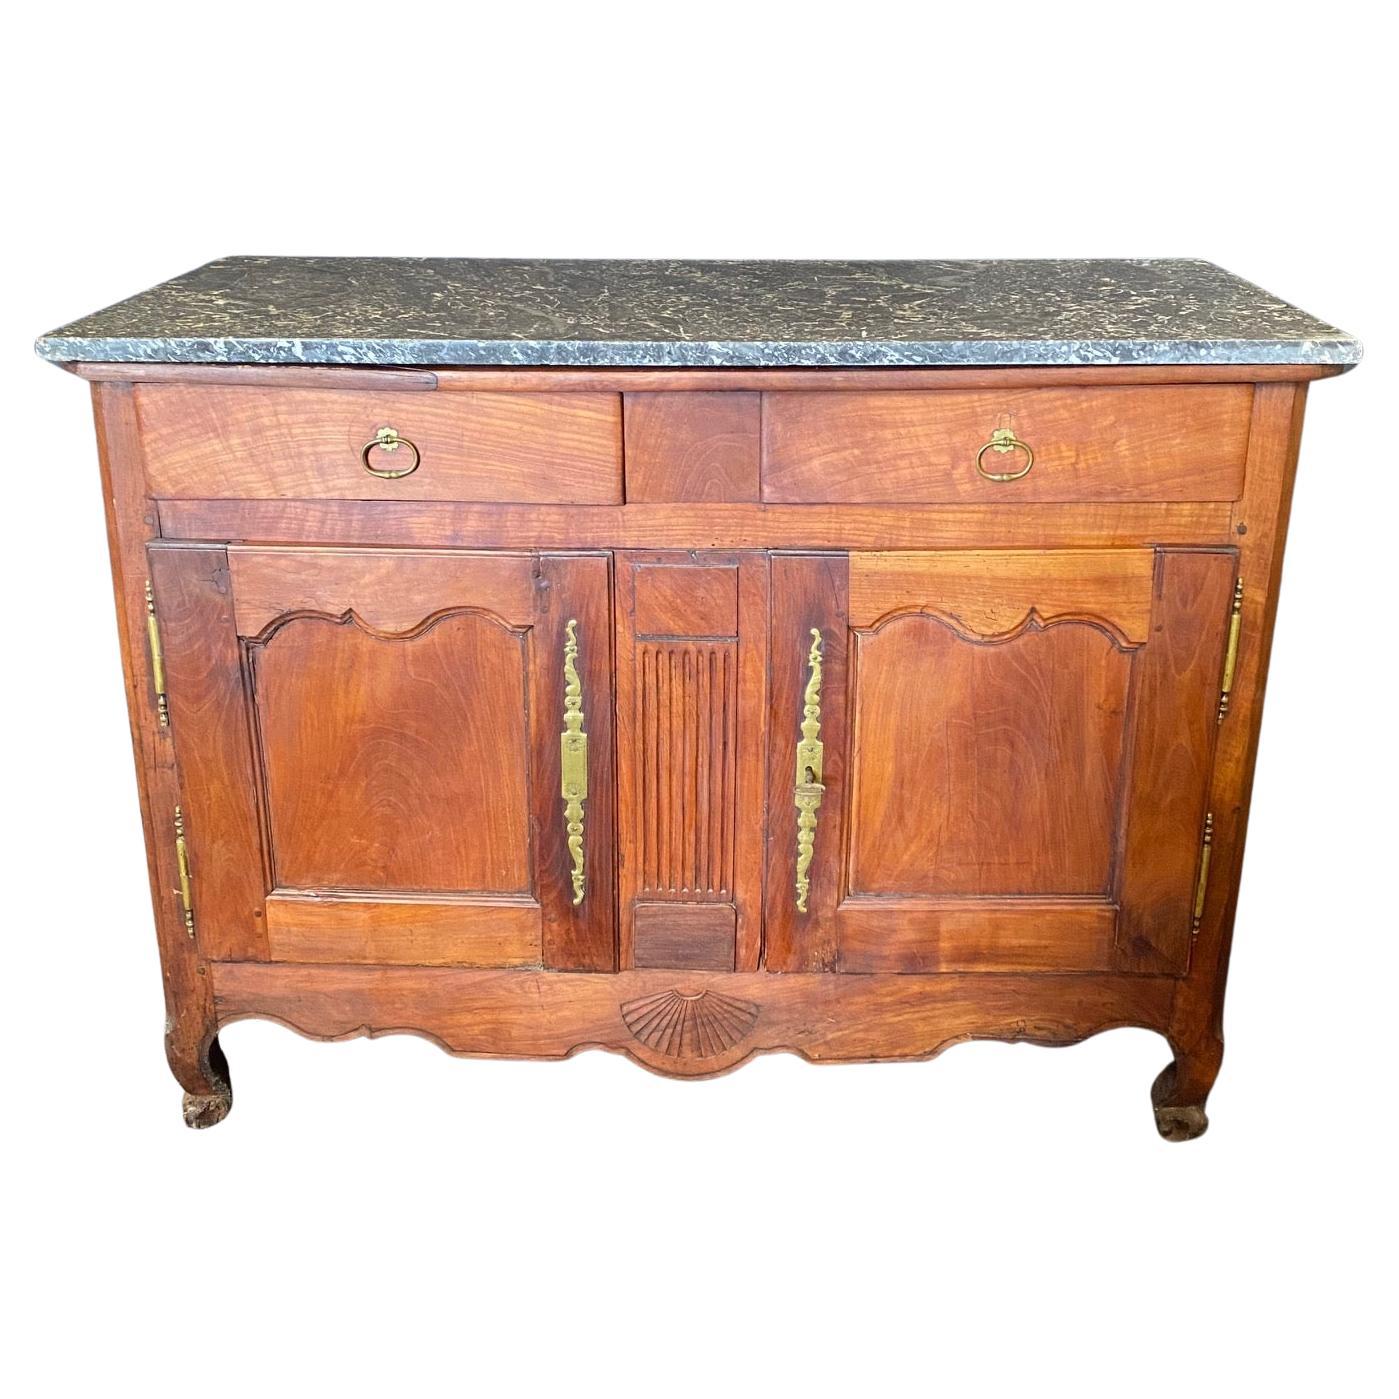 French Provincial Early 19th Century Buffet Sideboard For Sale